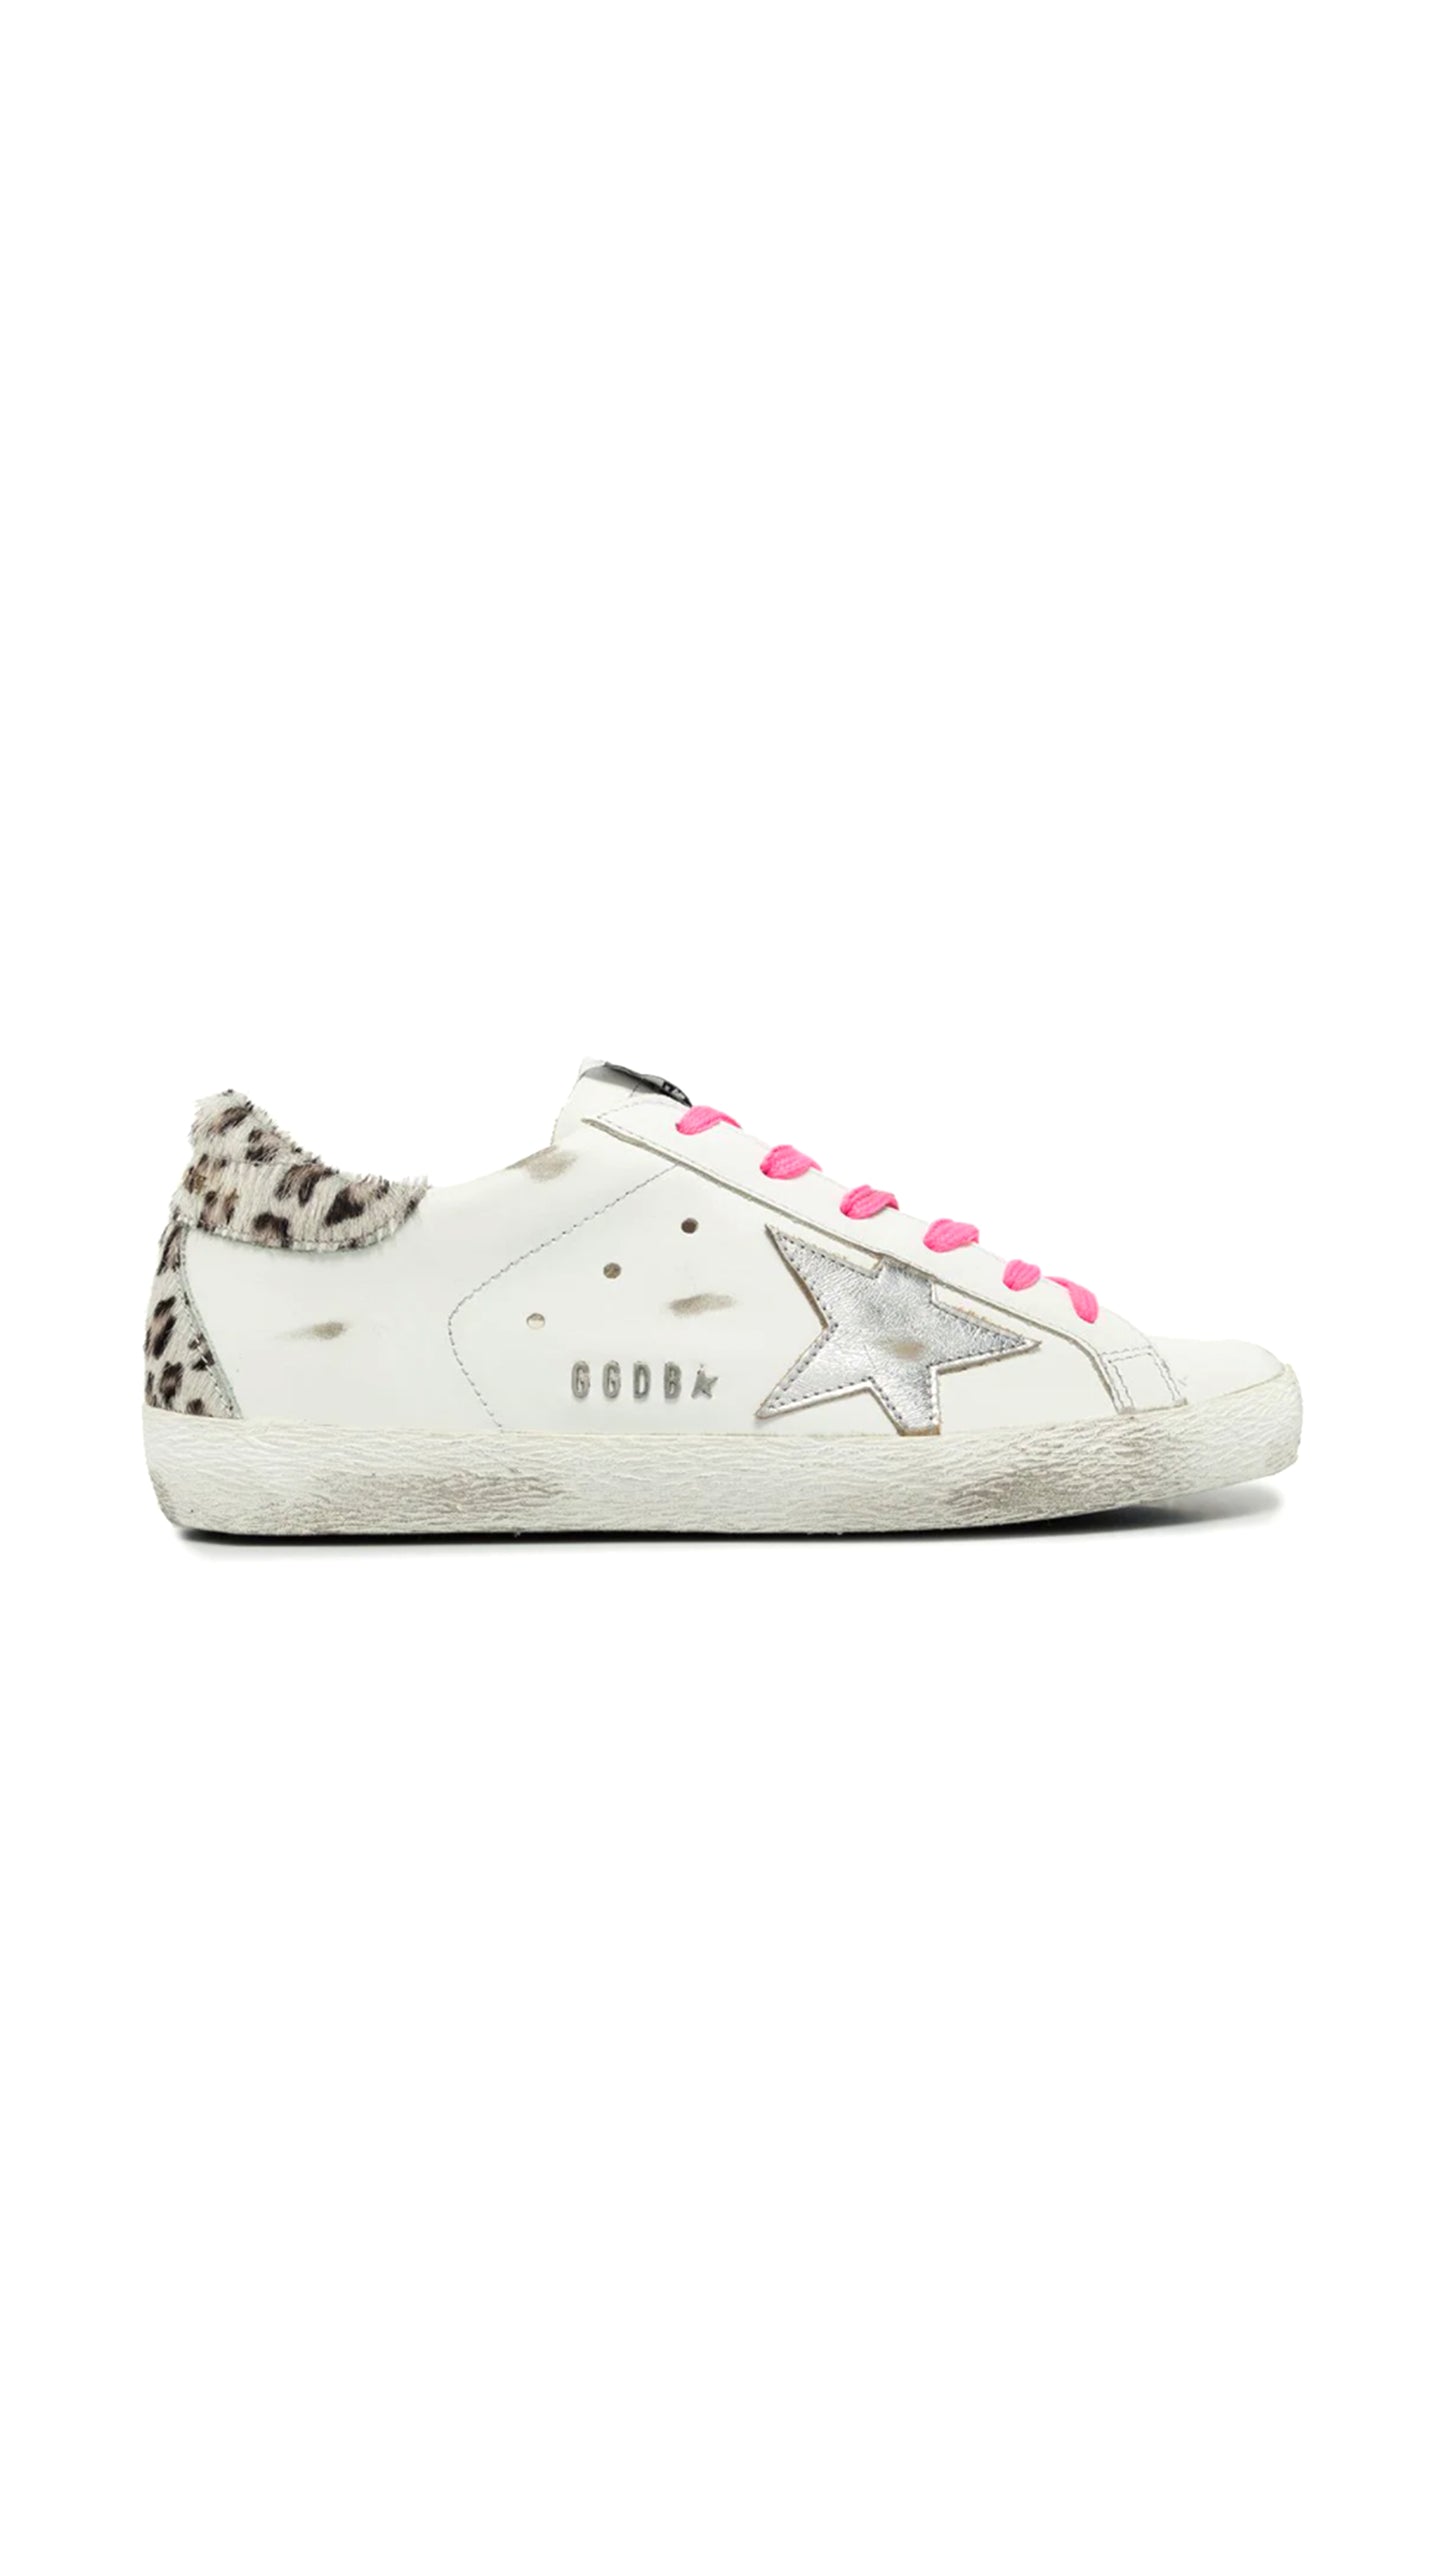 Superstar Sneakers - White / Pink